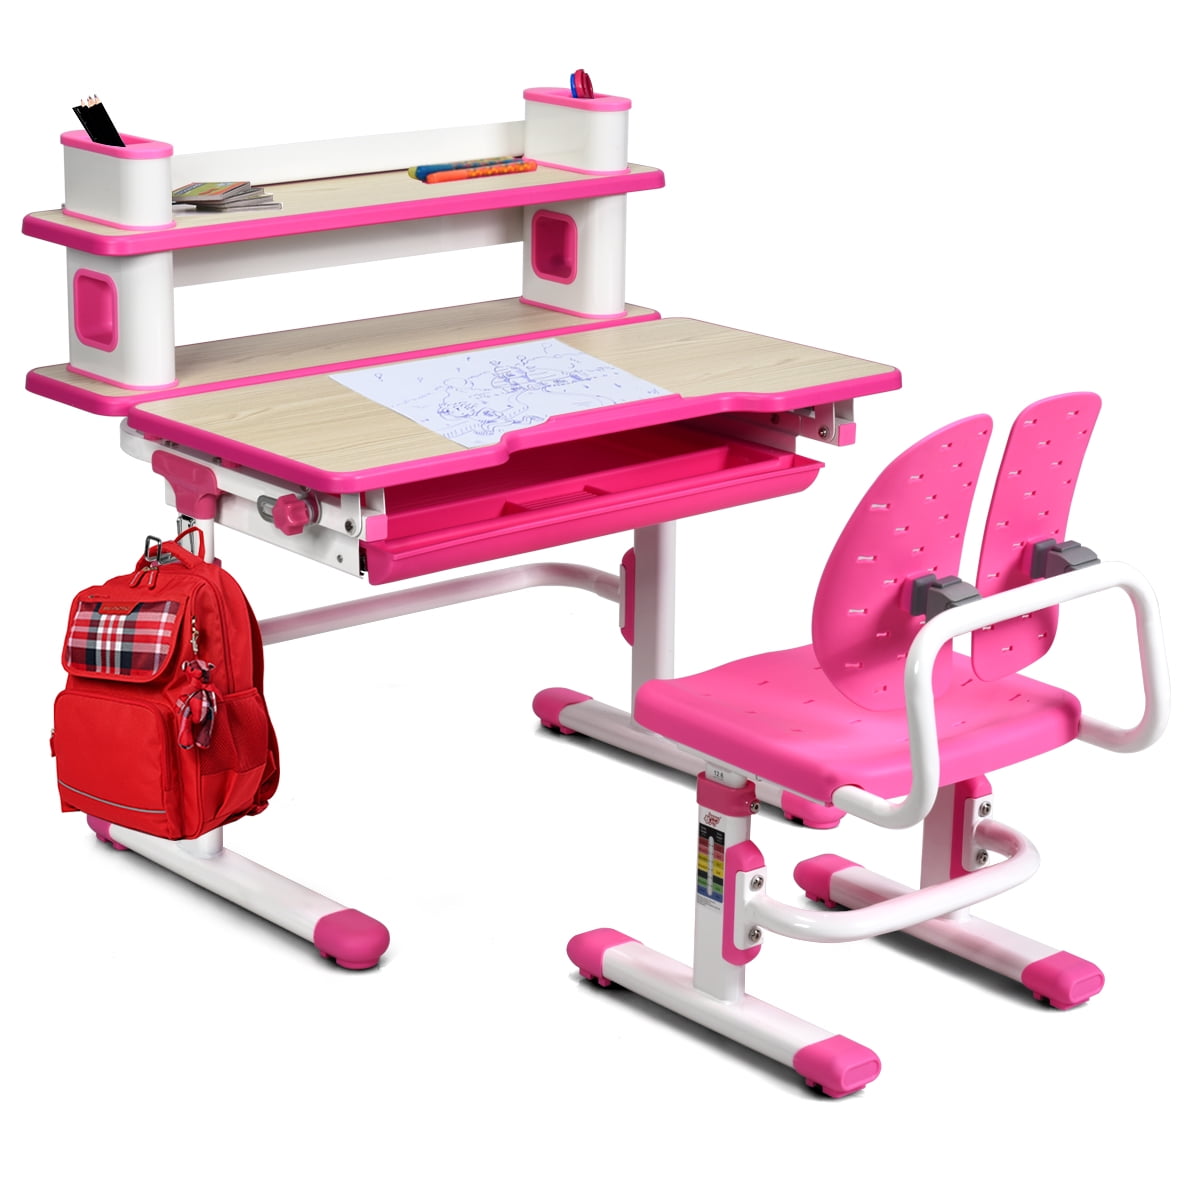 Ergonomic Childrens Desk and Chair Set Height Adjustable Tiltable School Desk Chair With Eye Protection Lamp Reading Stand for Girls Boys Pink Adjustable Kids Study Table and Chair Sets 